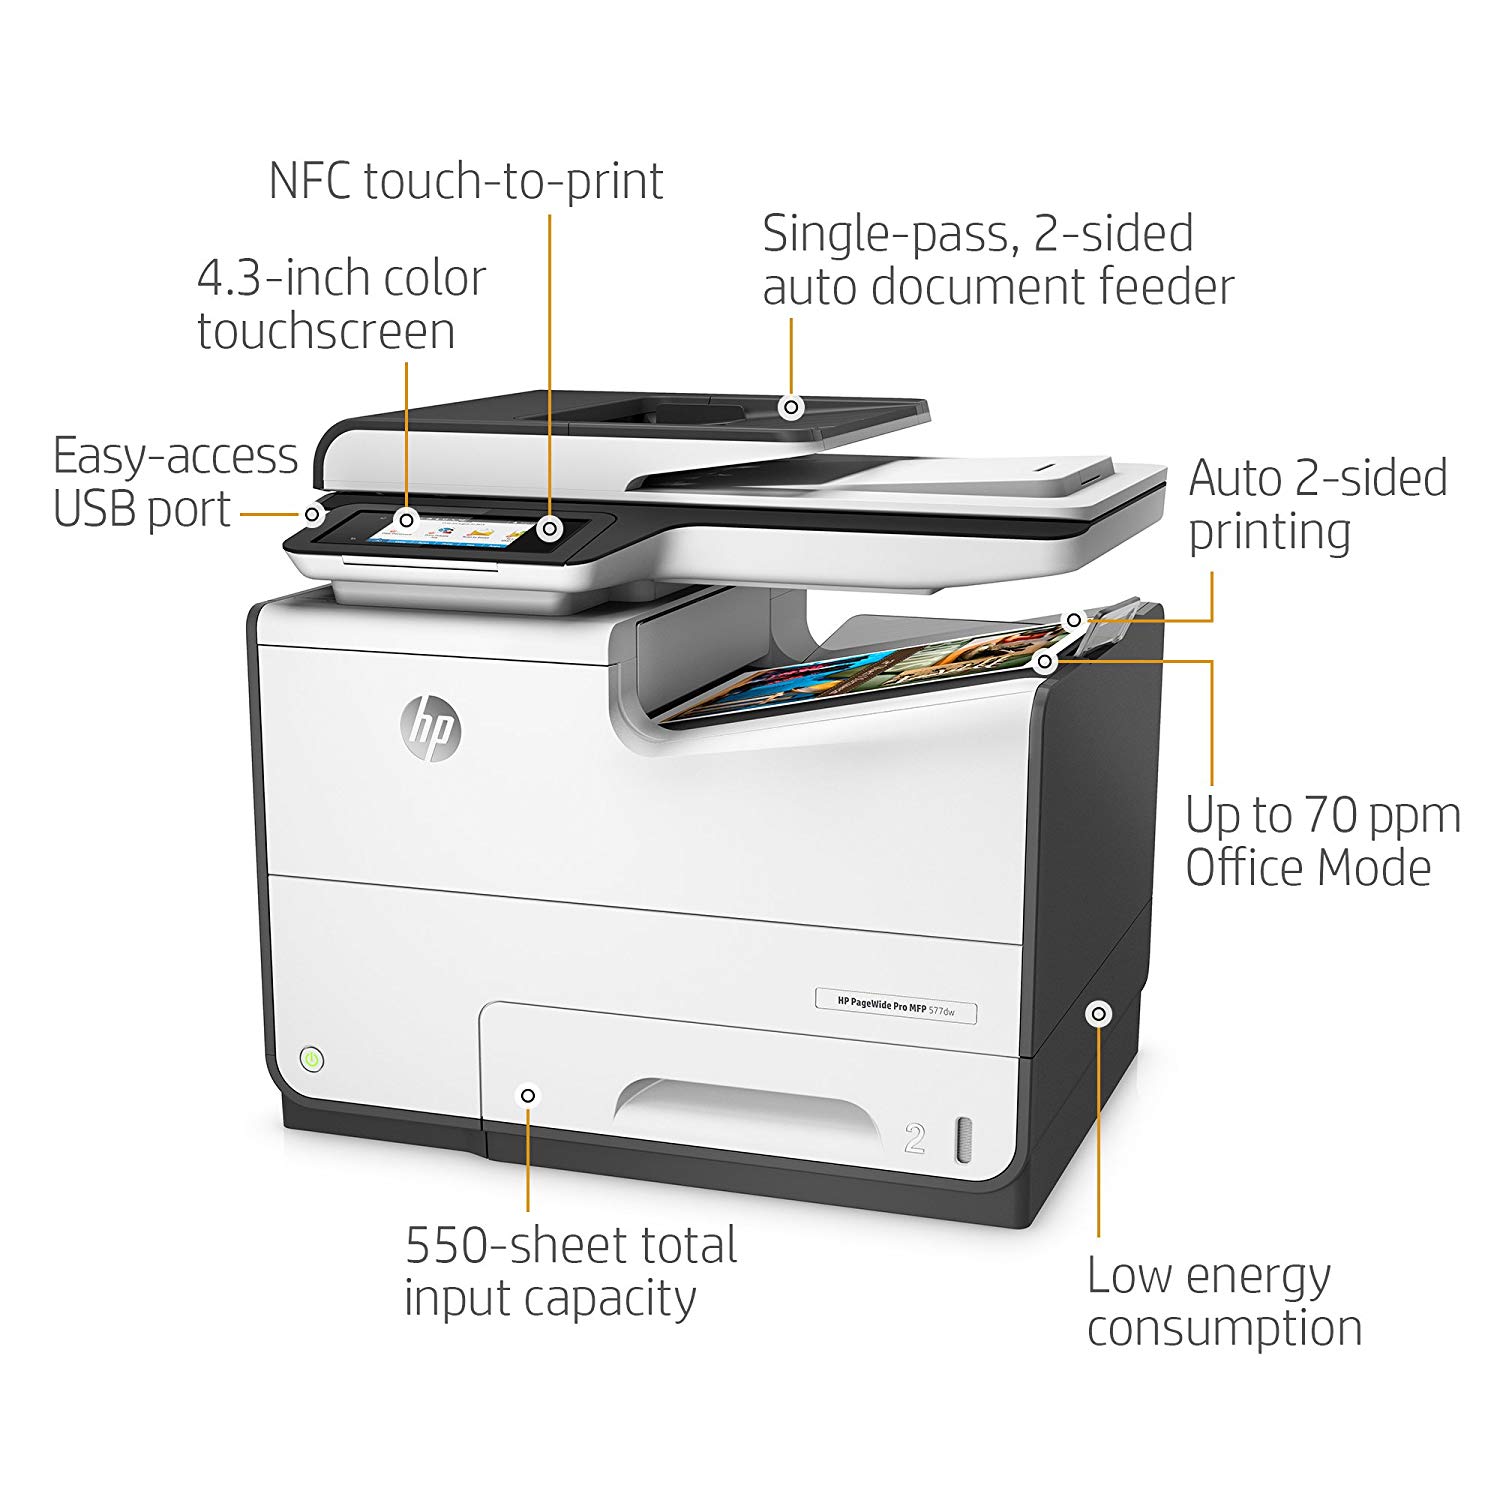 Hp pagewide pro 577 mfp user manual